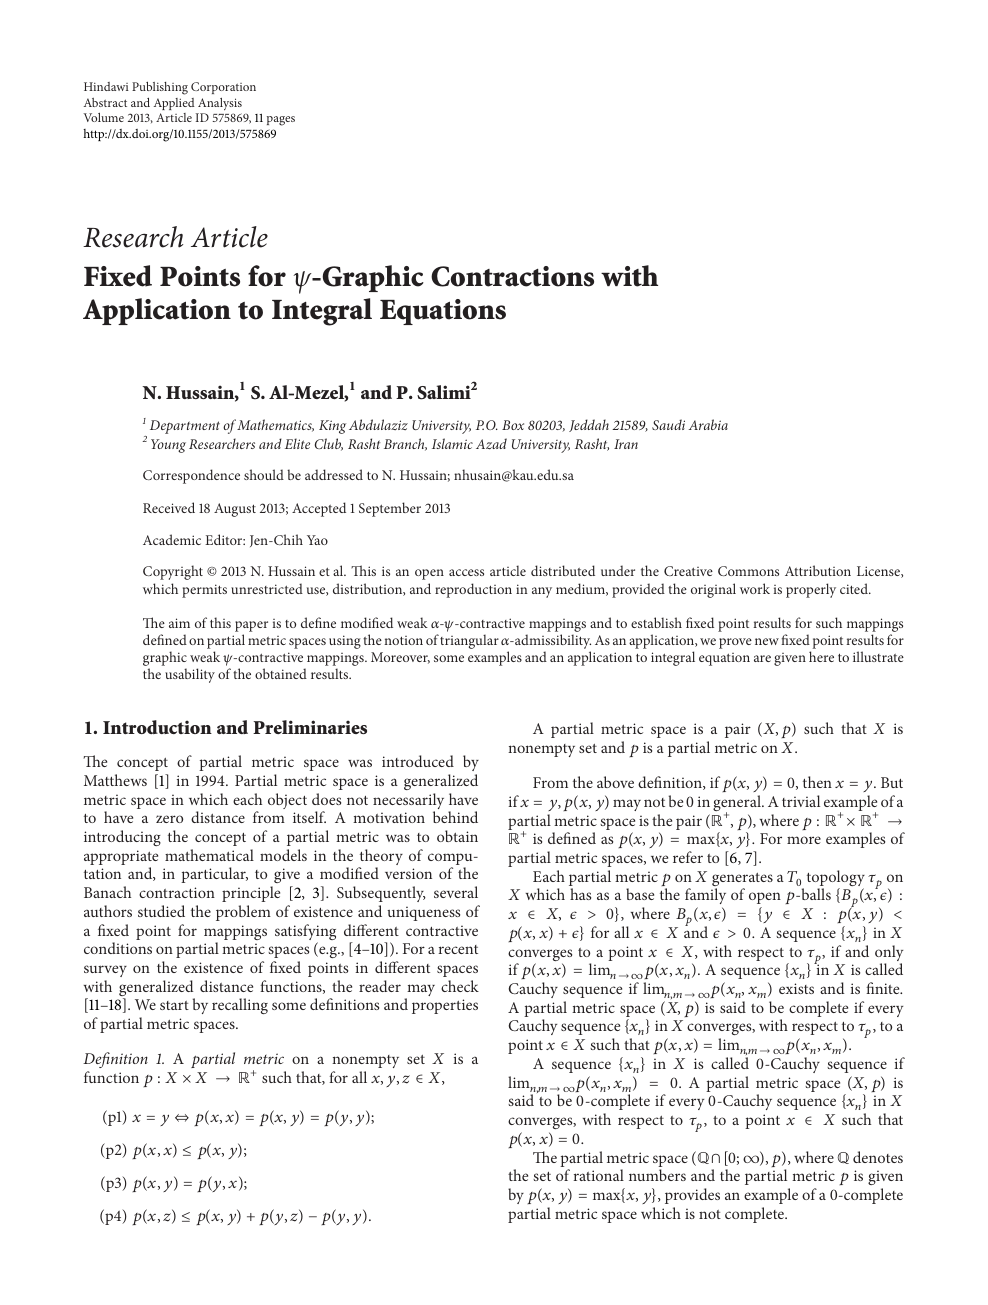 Fixed Points For Ps Graphic Contractions With Application To Integral Equations Topic Of Research Paper In Mathematics Download Scholarly Article Pdf And Read For Free On Cyberleninka Open Science Hub